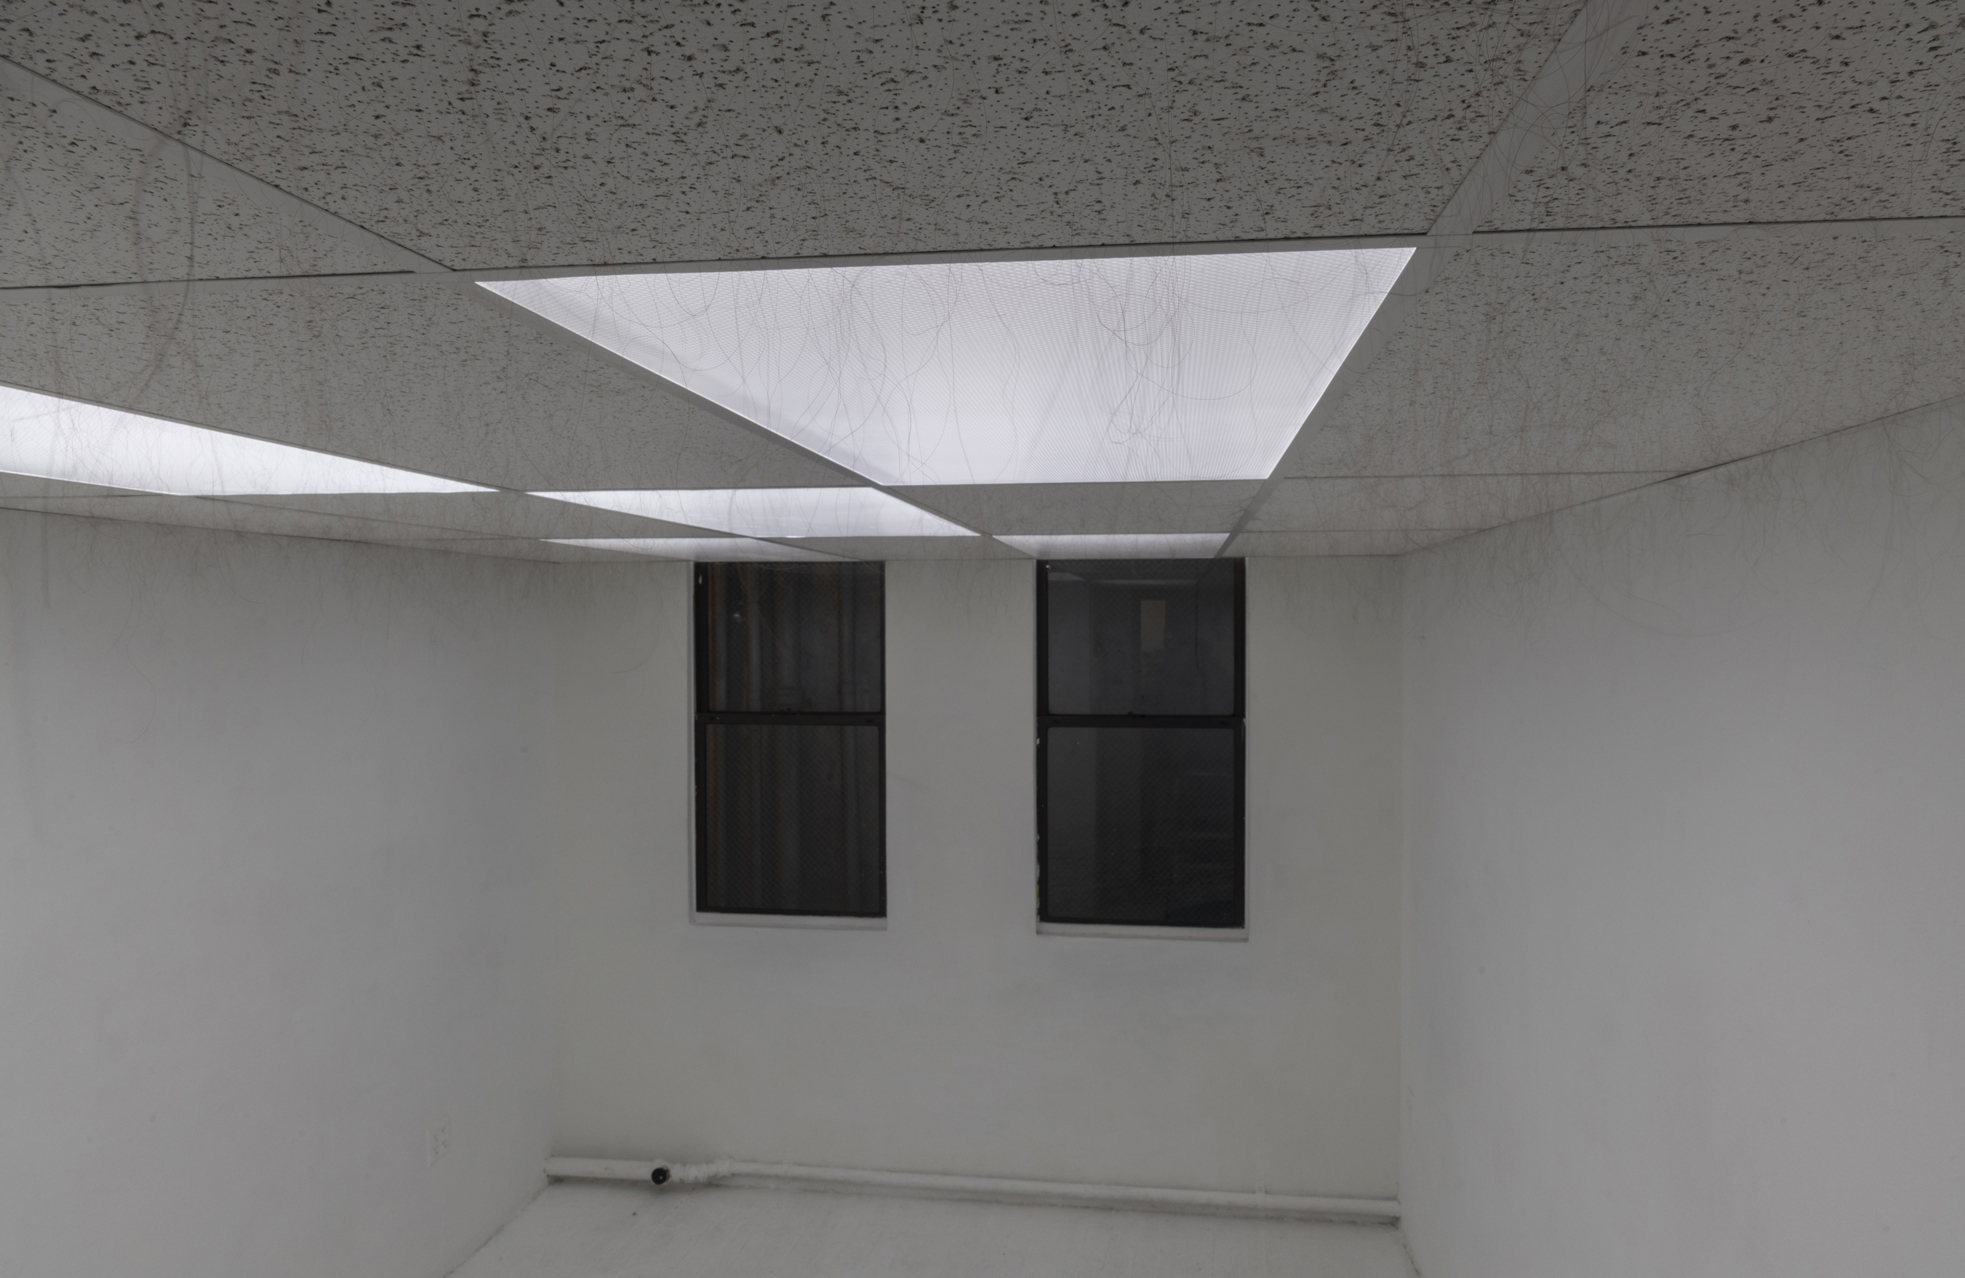   Anagen , 2018–19. Armstrong ceiling tiles in dropped ceiling in gallery, human hair, glue. 86 x 117 x 203 inches (approximately). 